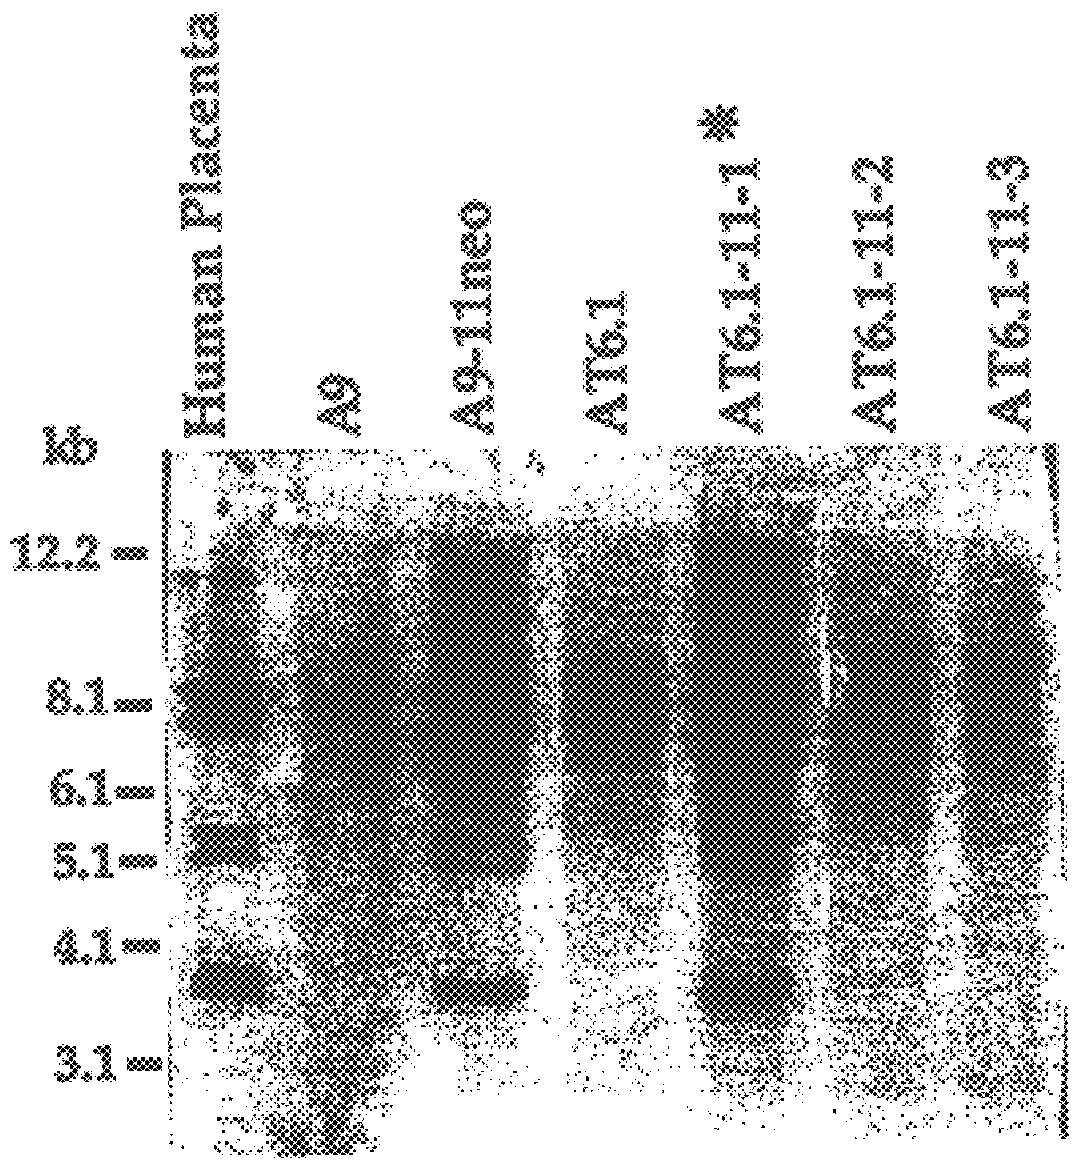 Diagnostic methods and gene therapy using reagents derived from the human metastasis suppressor gene KAI1